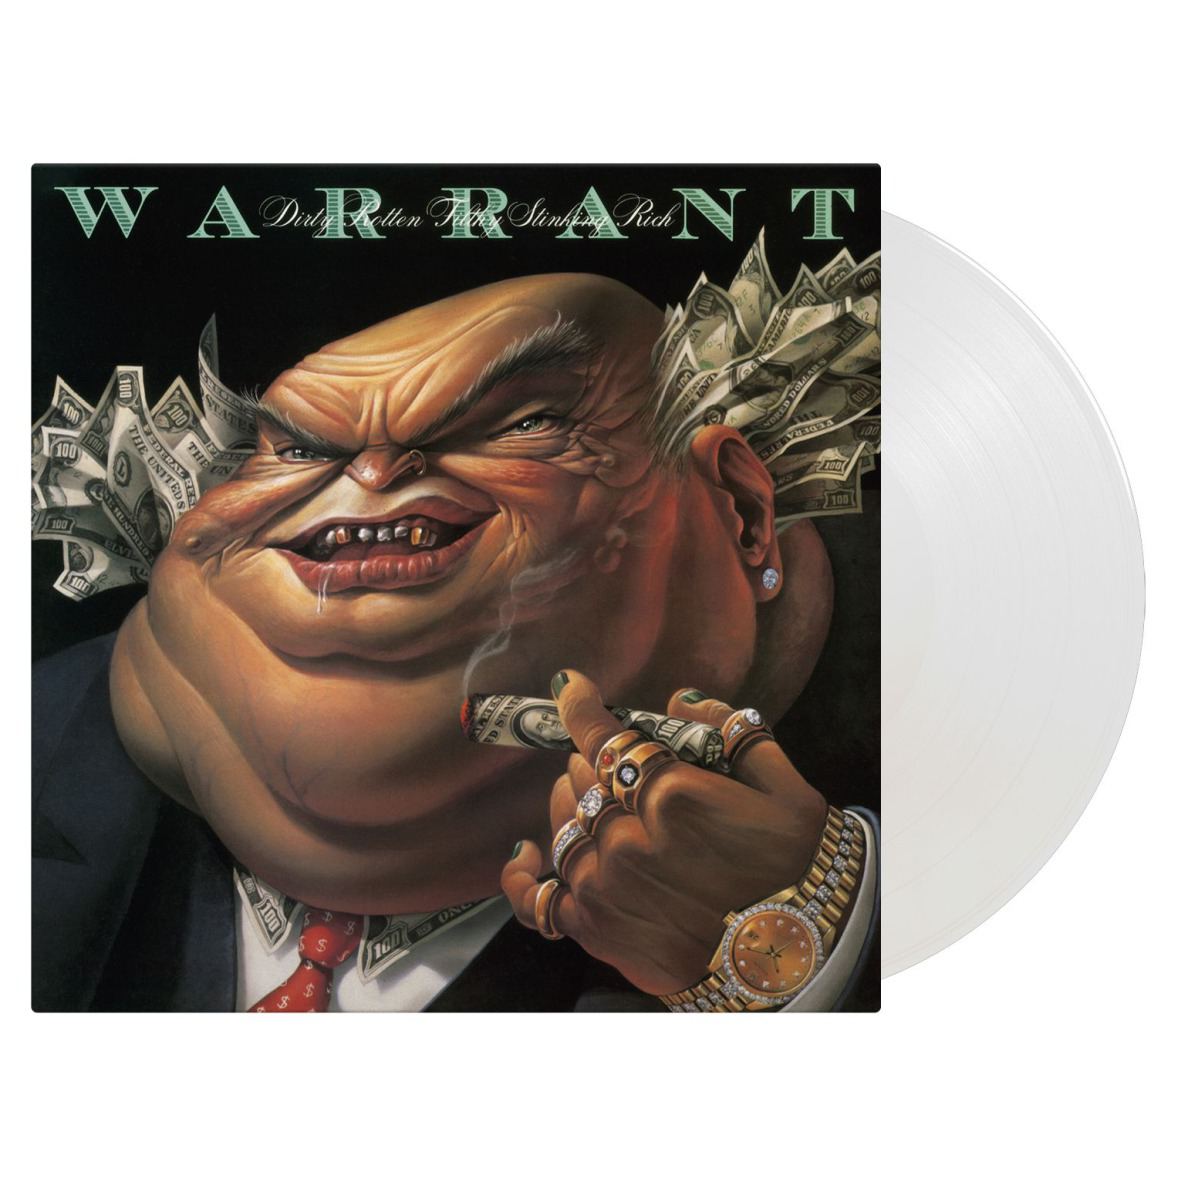 Warrant - Dirty Rotten Filthy Stinking Rich: Limited Clear Transparent Vinyl LP